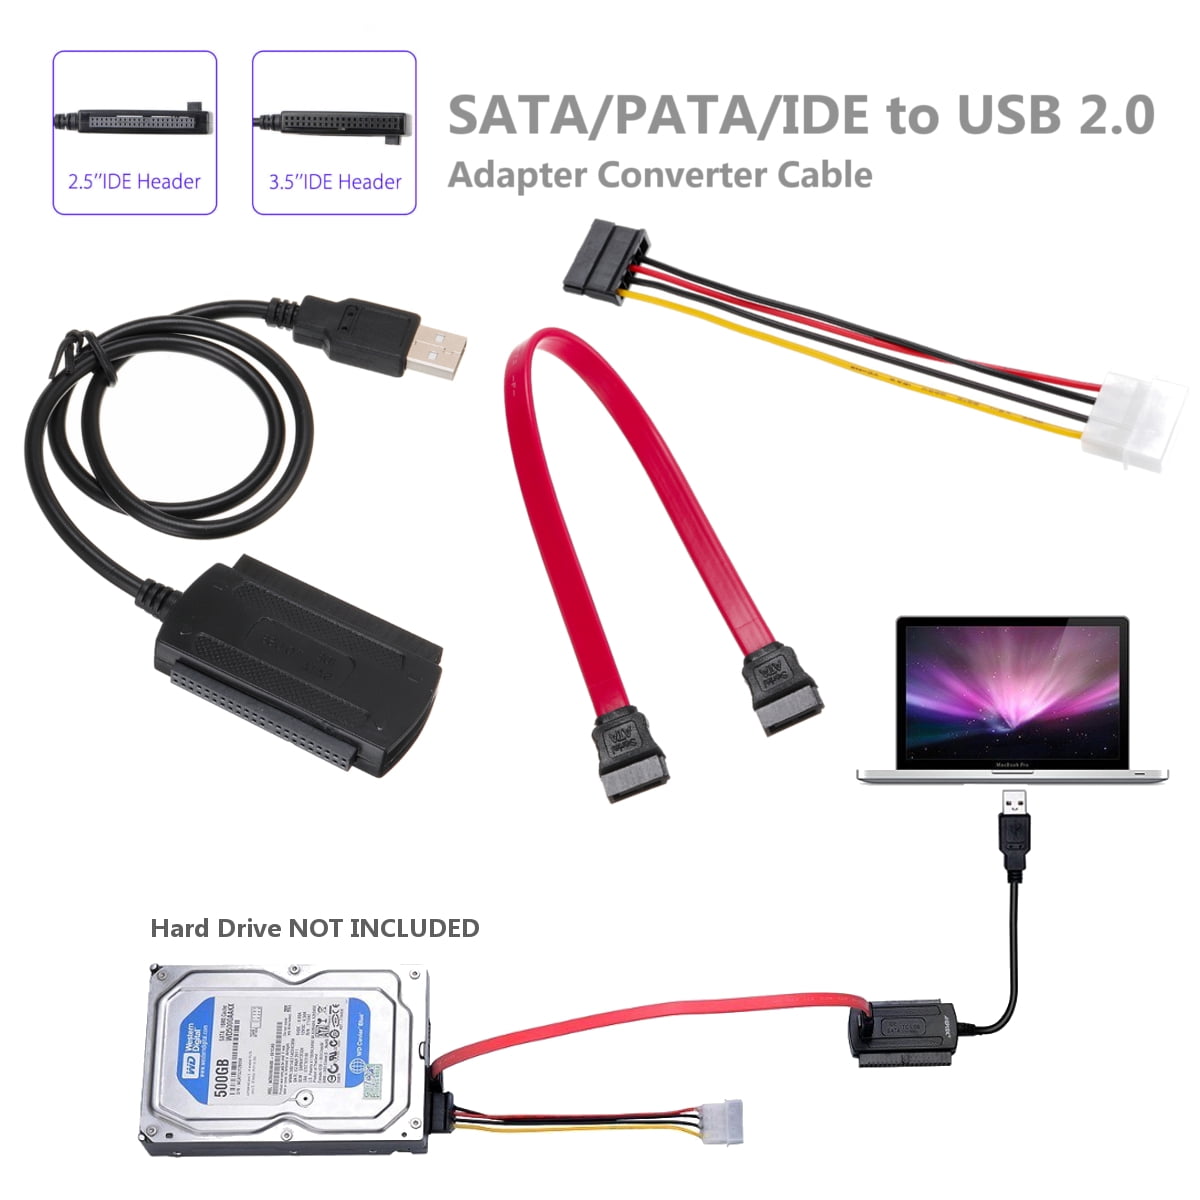 SATA//PATA//IDE to USB 2.0 Adapter Converter Cable for 2.5//3.5 Inch Hard Drive Li